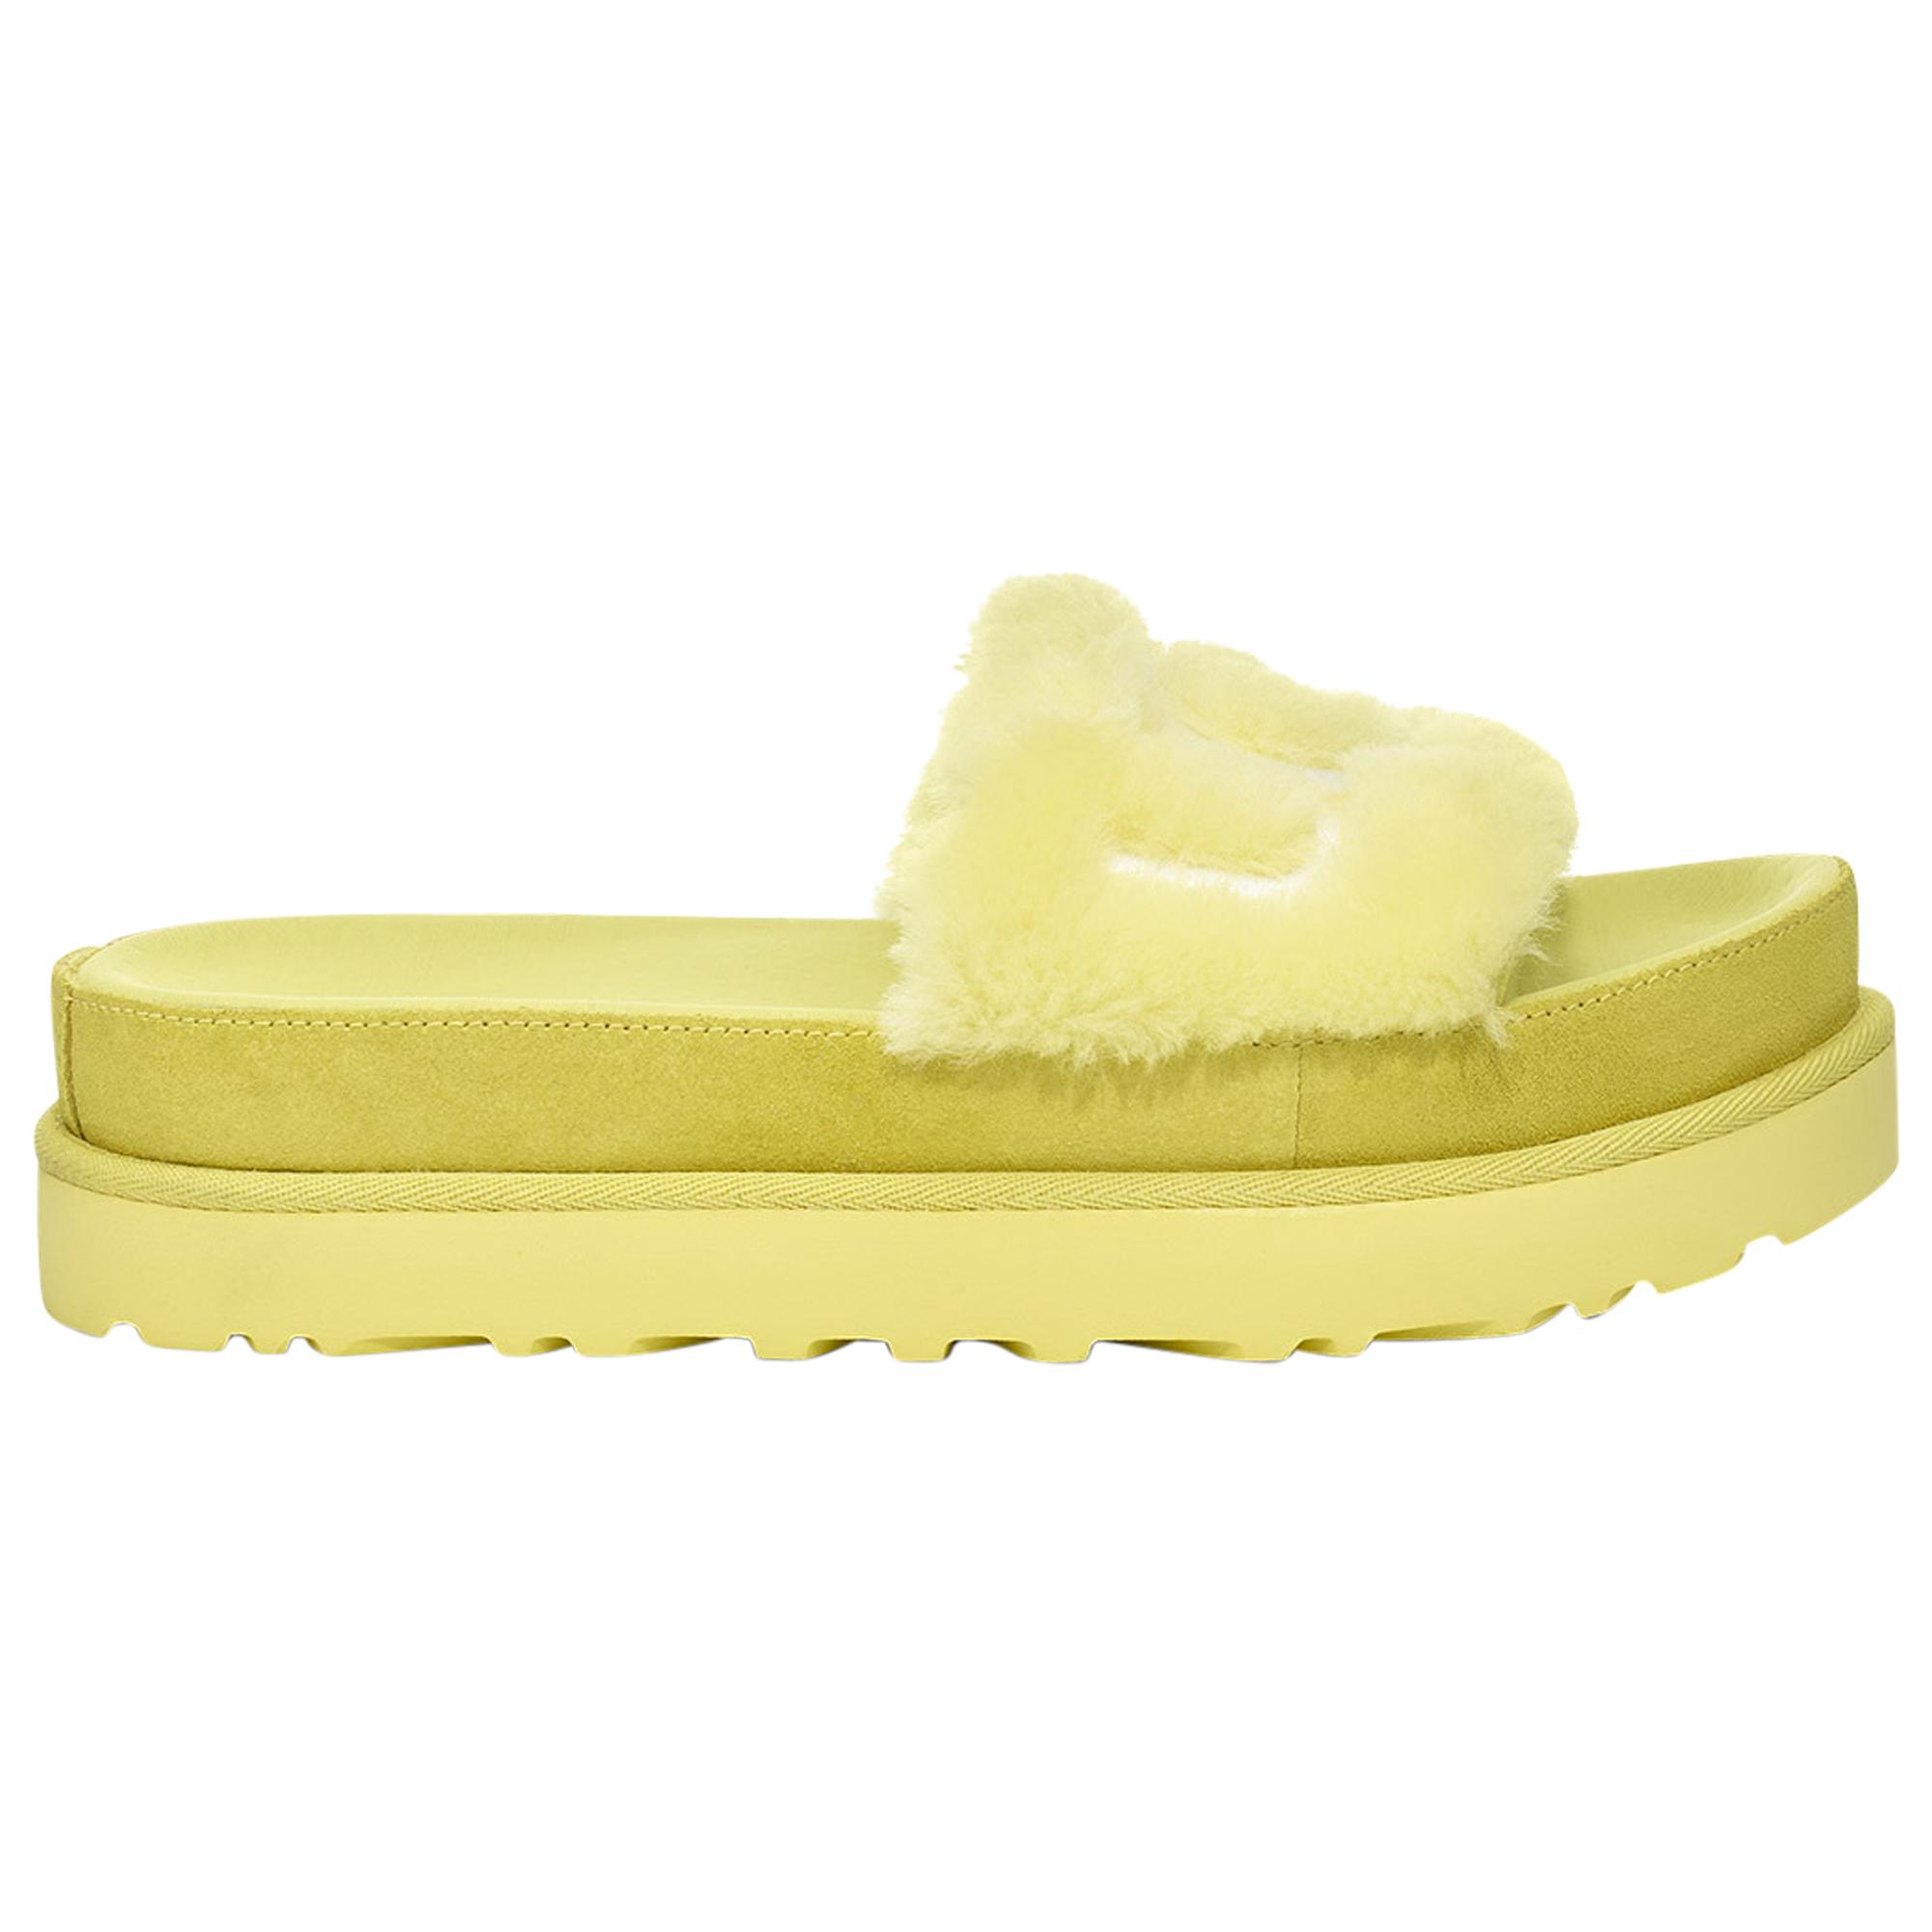 UGG Laton Fur Slide in Lime/Lime (Yellow) - Save 41% | Lyst